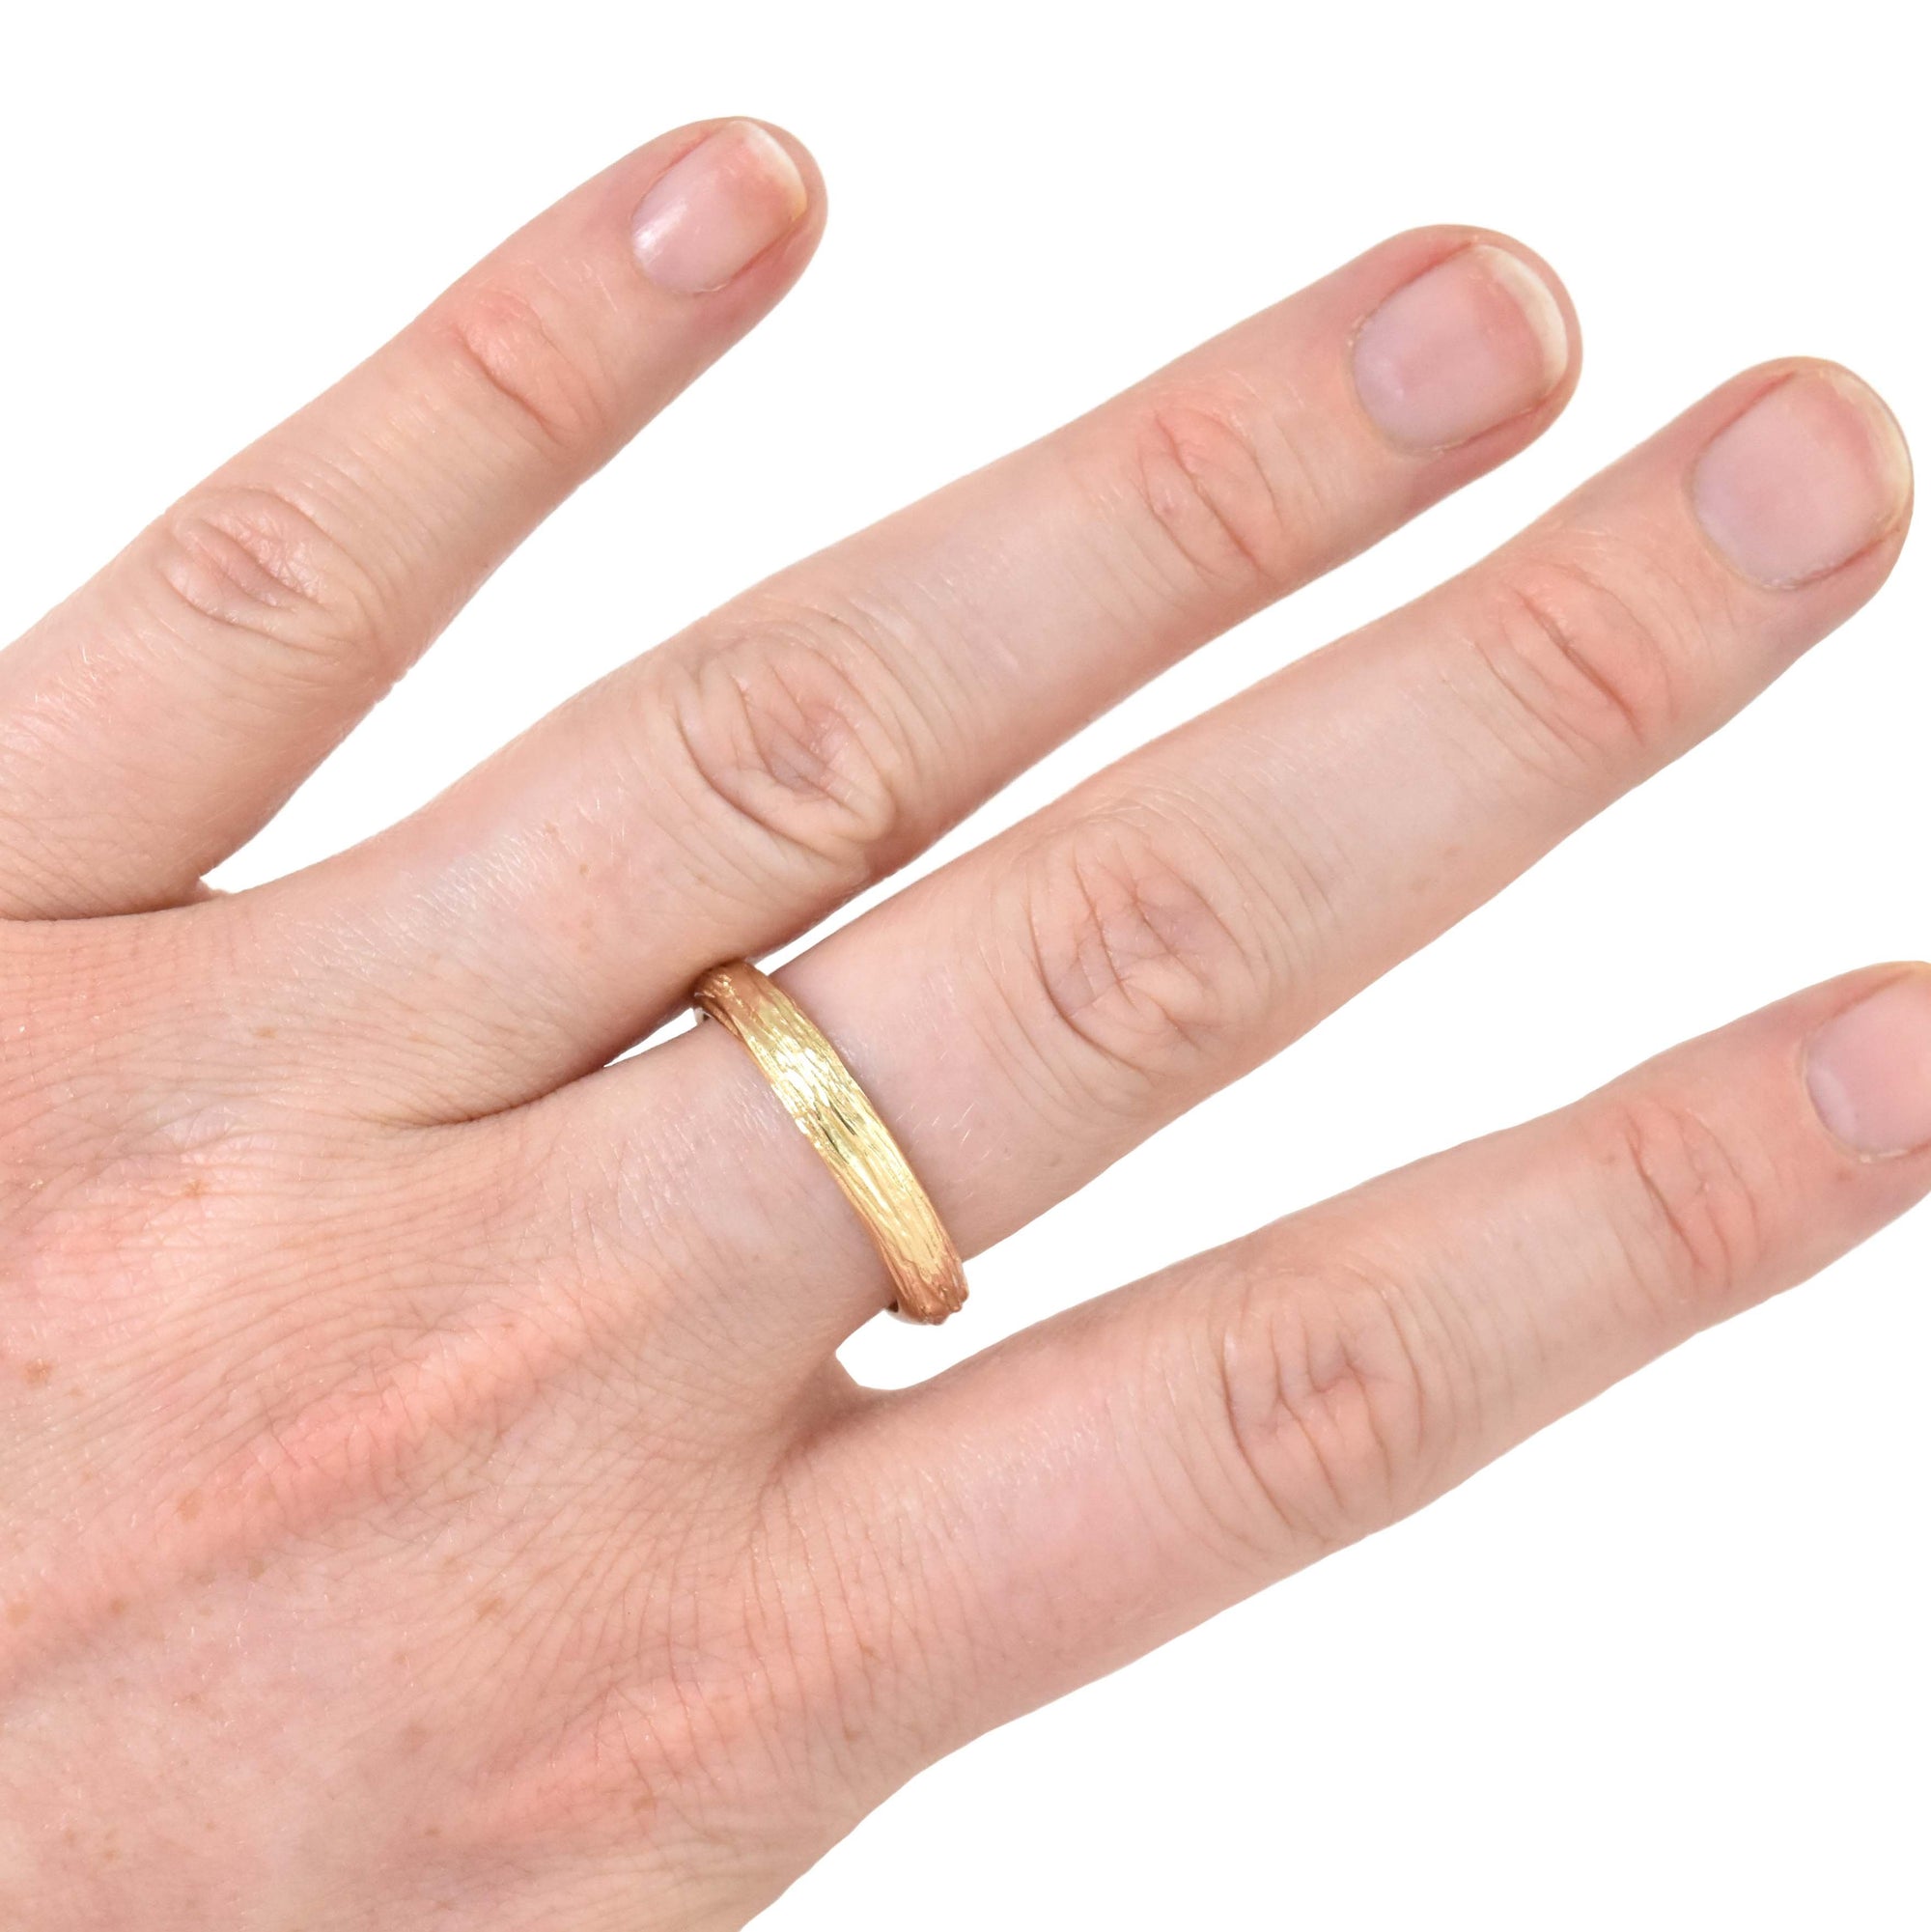 Gold Half Round Timber Ring - your choice of gold - Wedding Ring  18K Palladium White Gold  14K Rose Gold 3921 - handmade by Beth Millner Jewelry